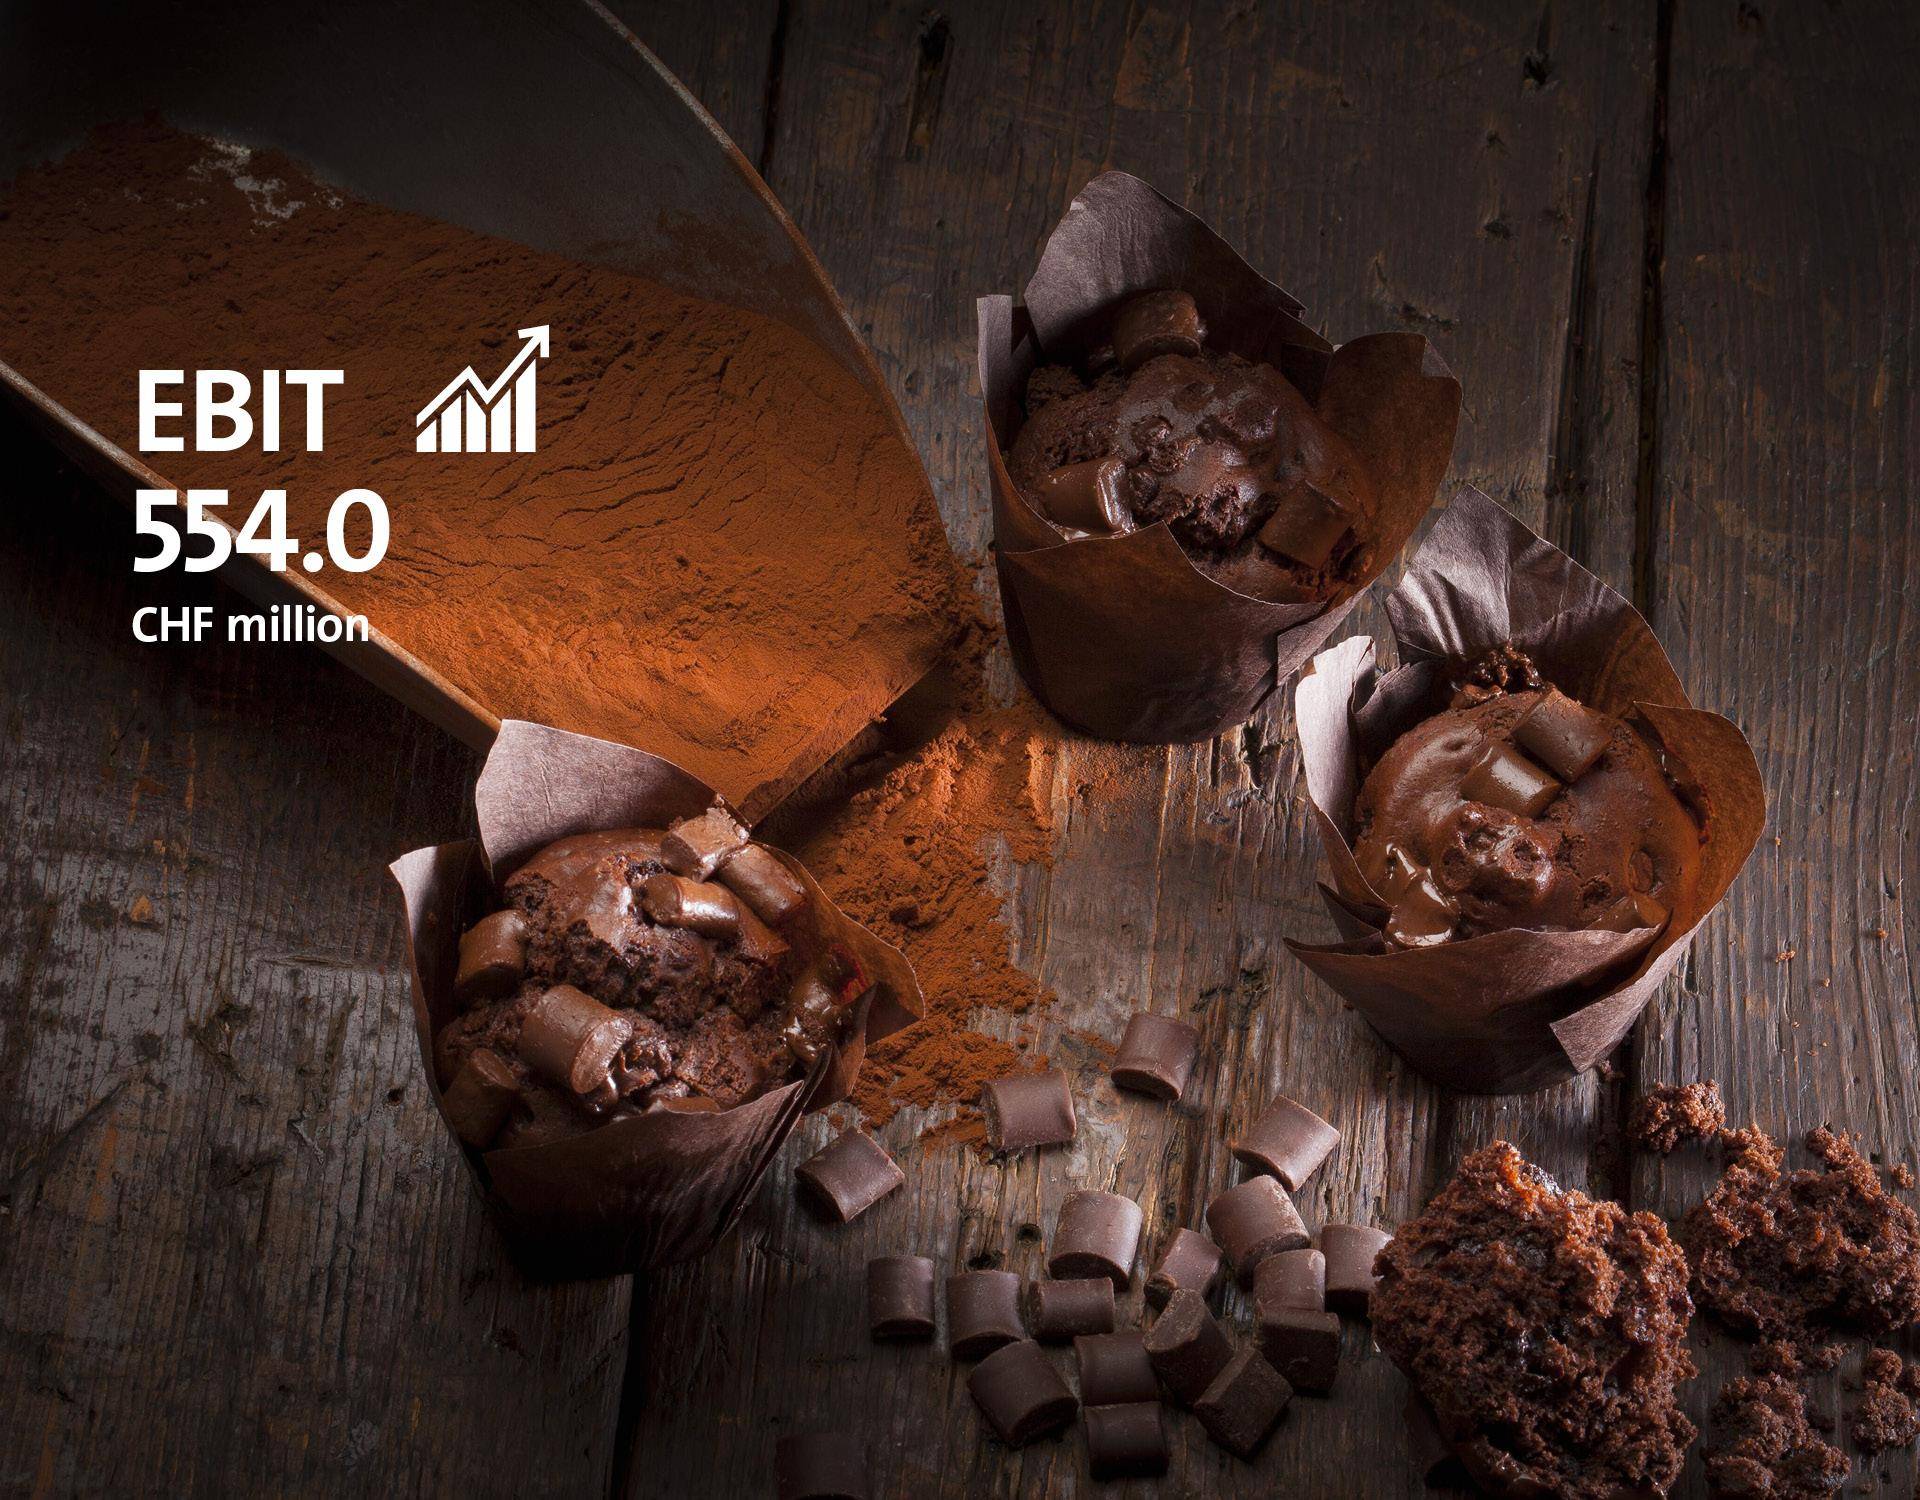 Image Slider EBIT Fiscal Year 2017/18 Barry Callebaut Group